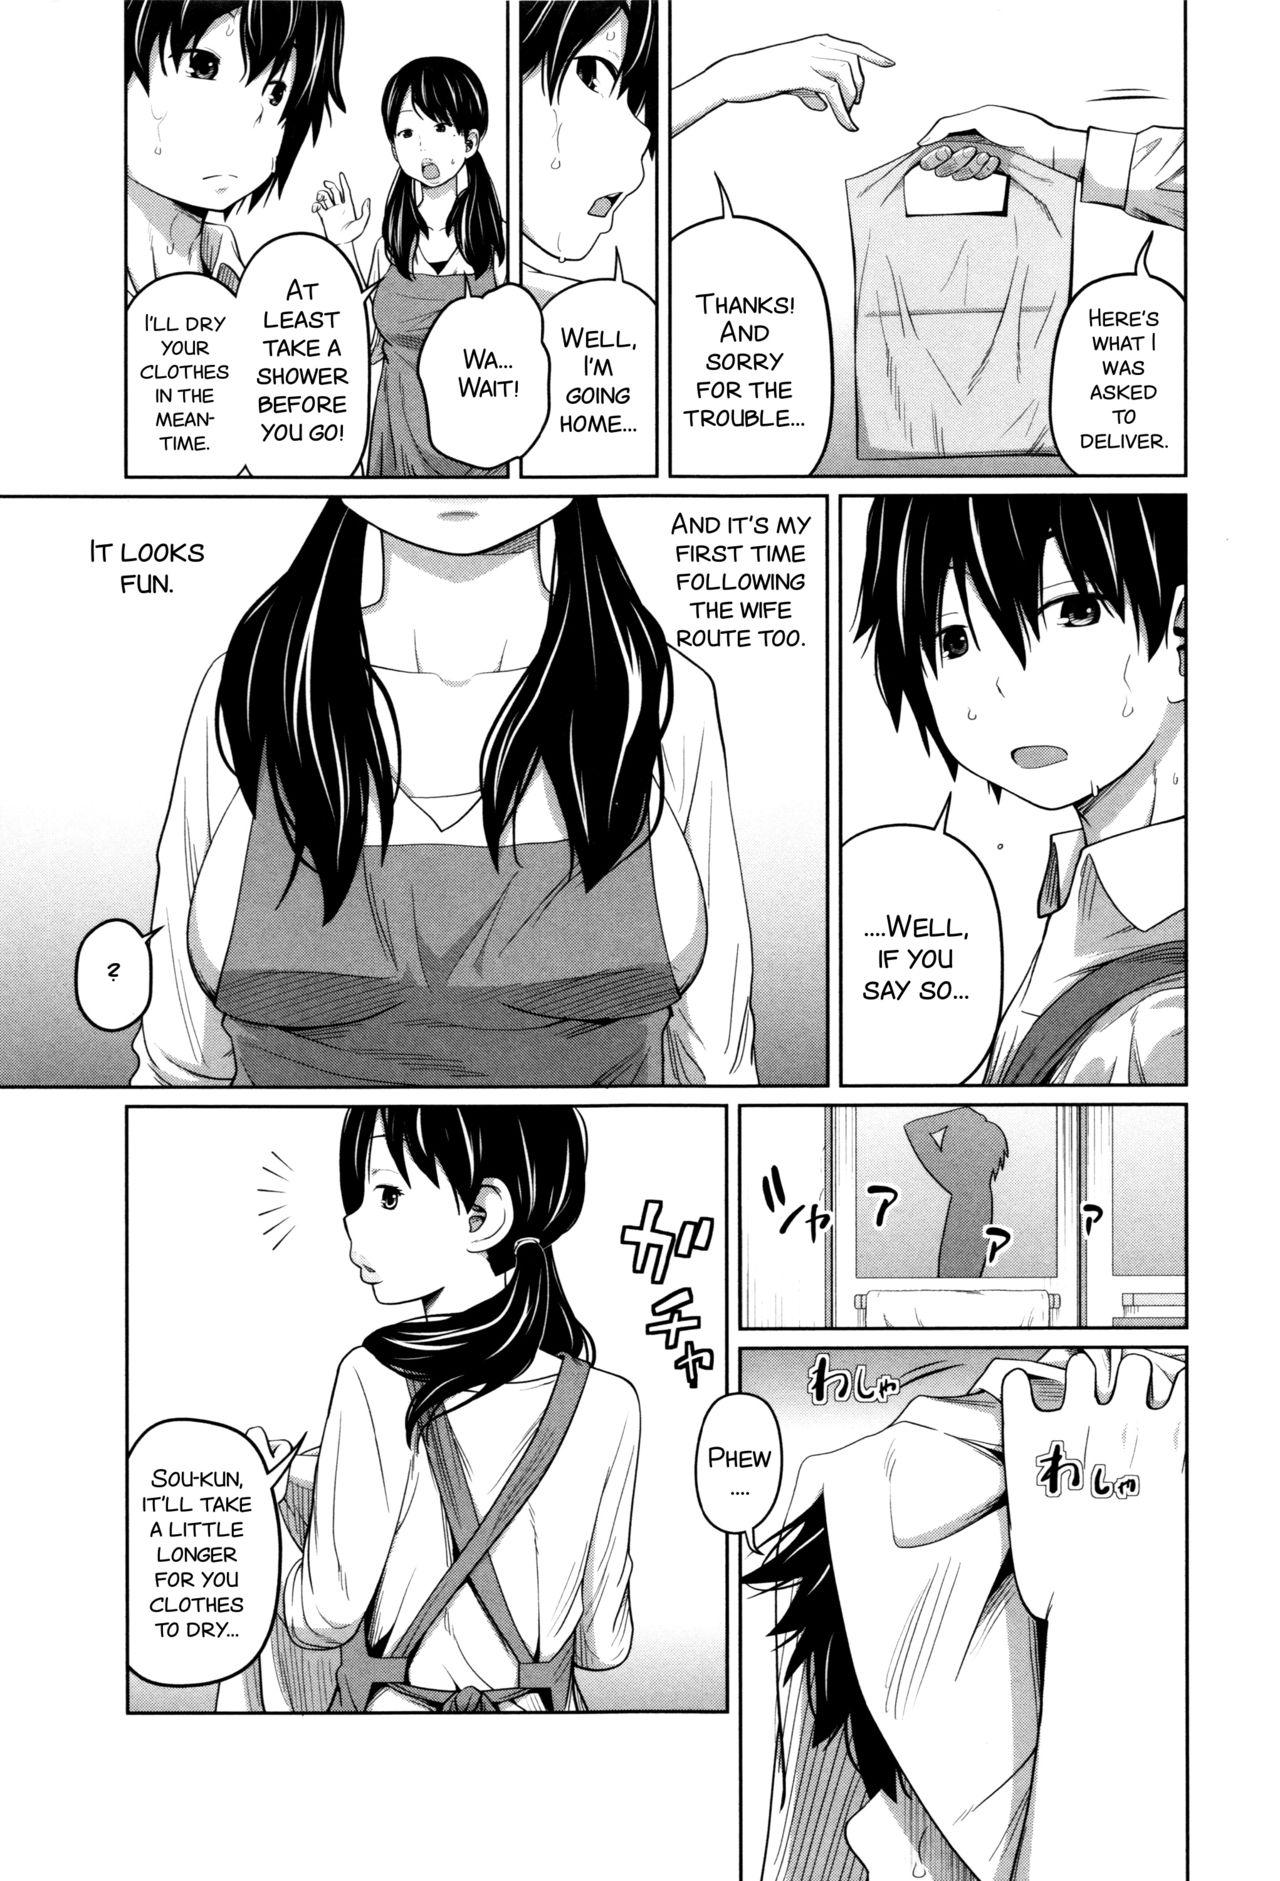 Movie Daily Sisters Ch. 4 Amatuer - Page 3